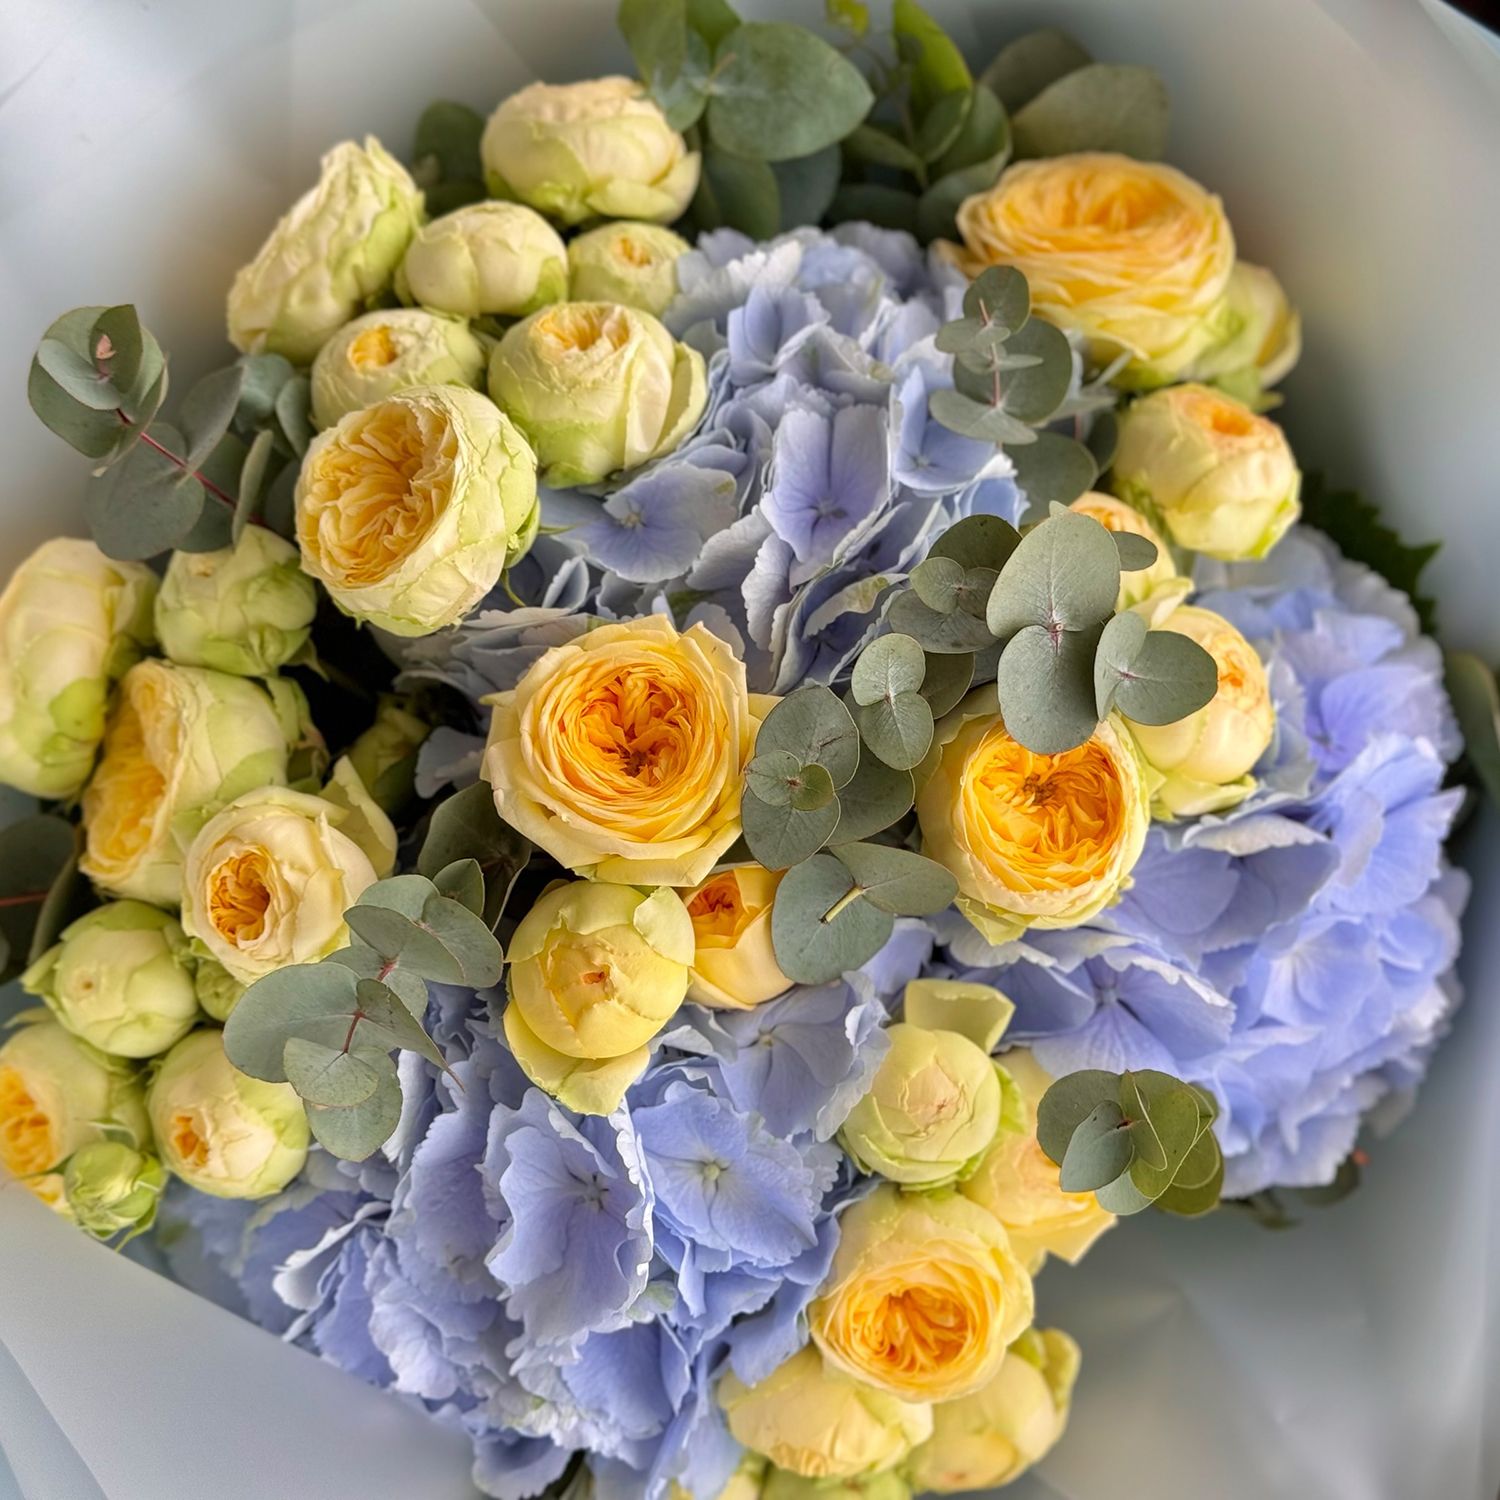 Blue hydrangea and yellow roses